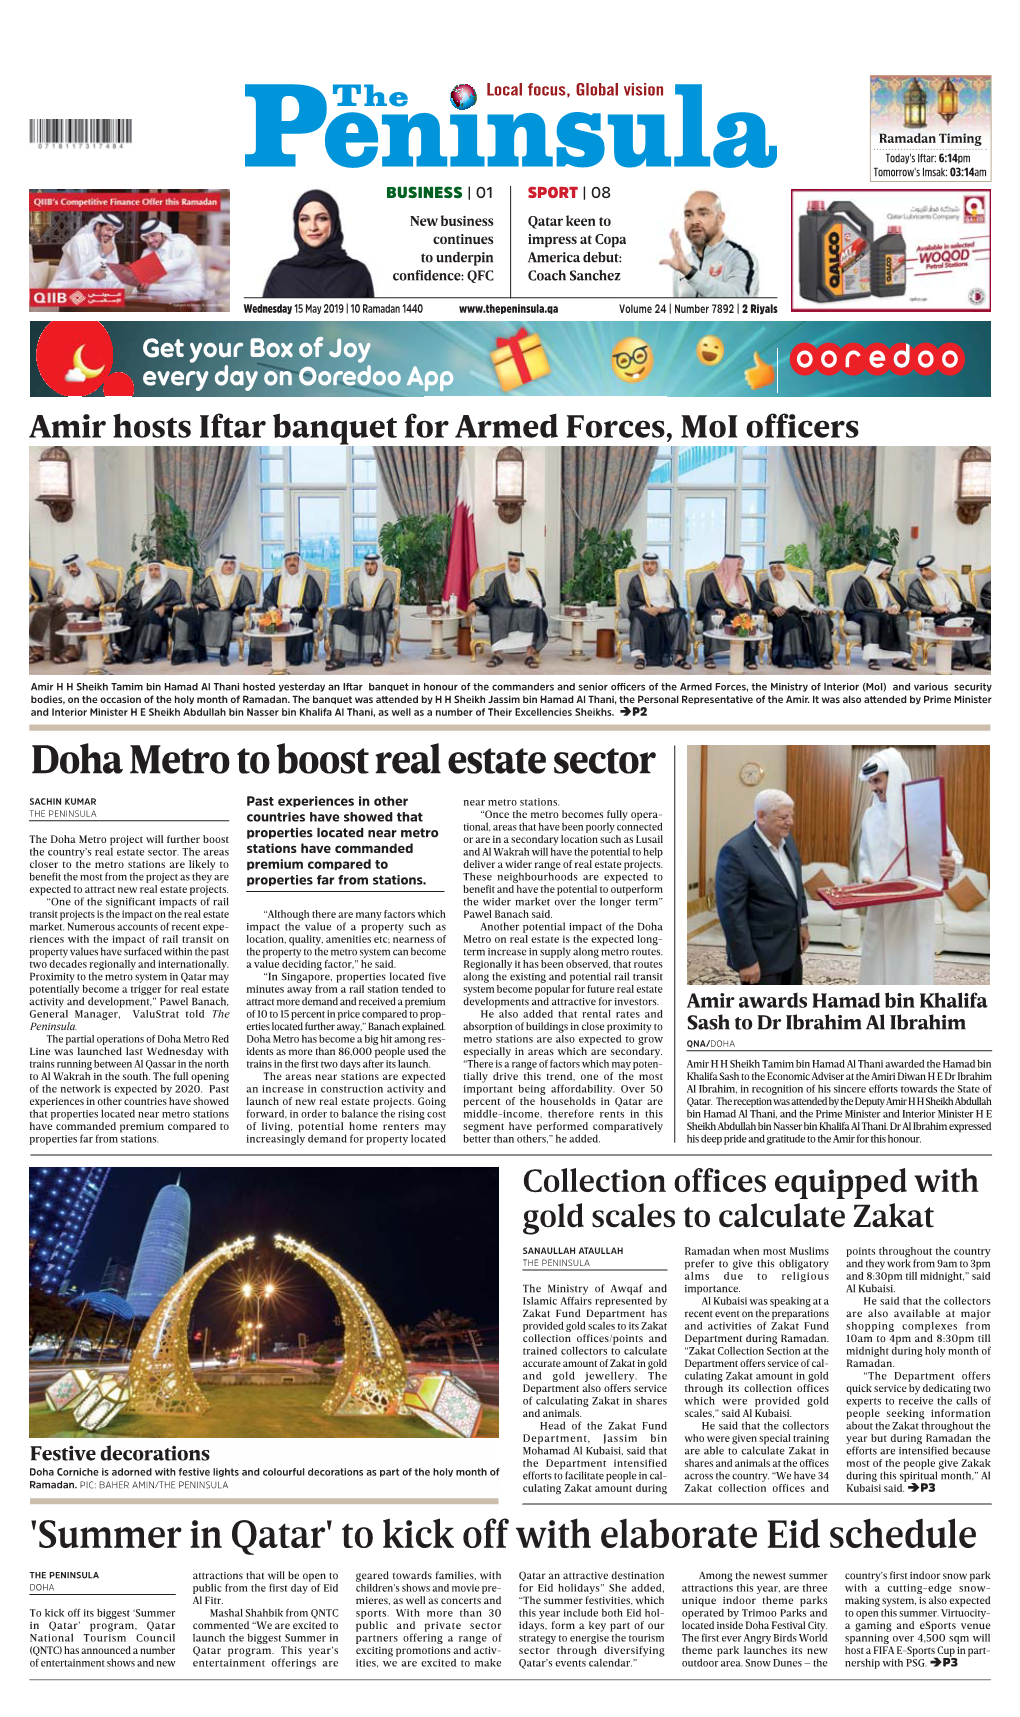 Doha Metro to Boost Real Estate Sector